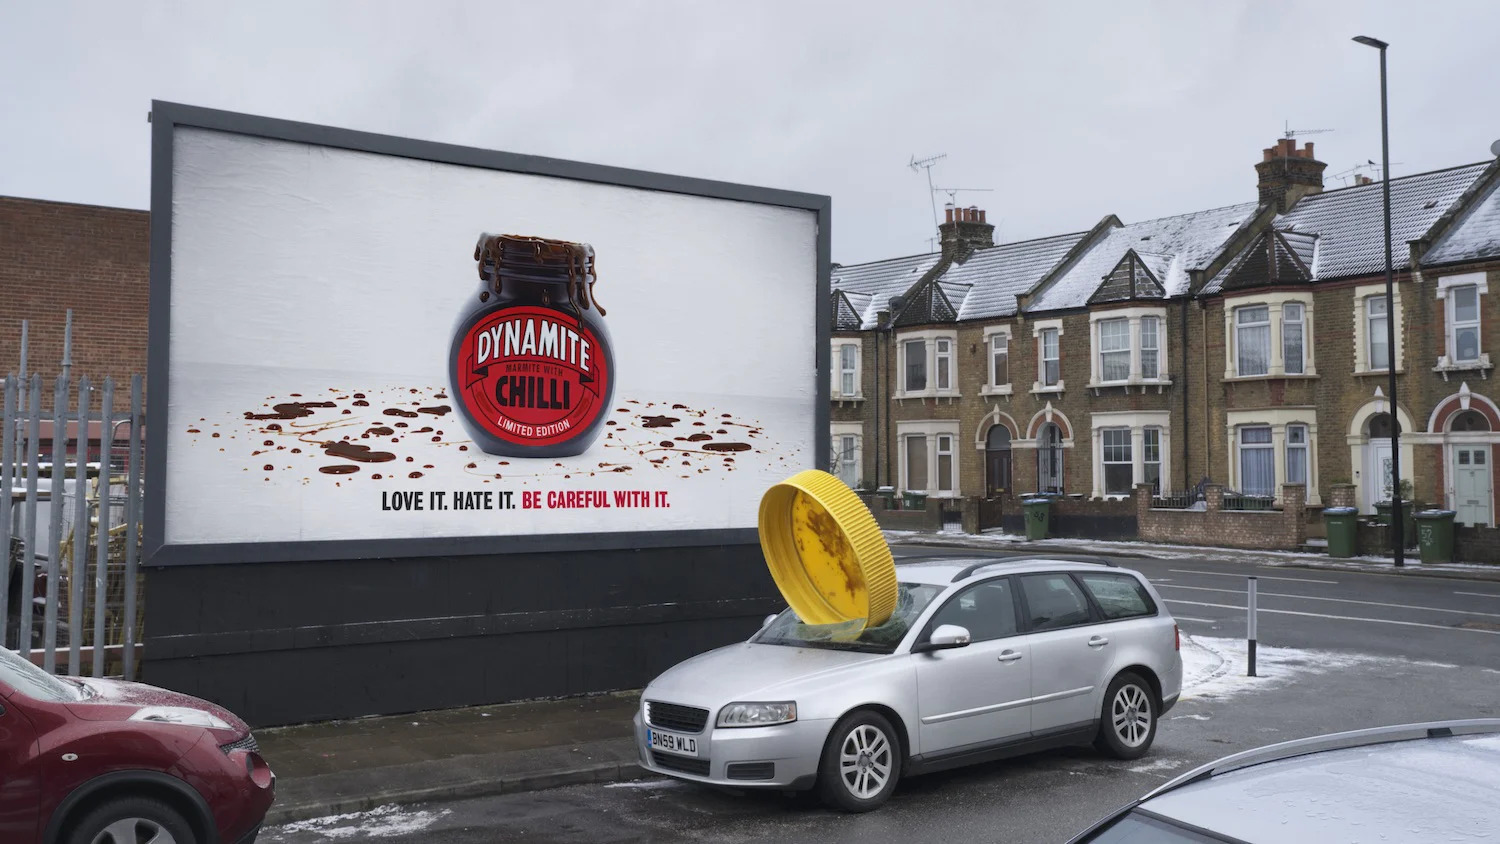 Billboard of an empty Dynamite Chilli jar with a missing lid. In real life, a car sits in front of the billboard with a large yellow lid stuck in its hood